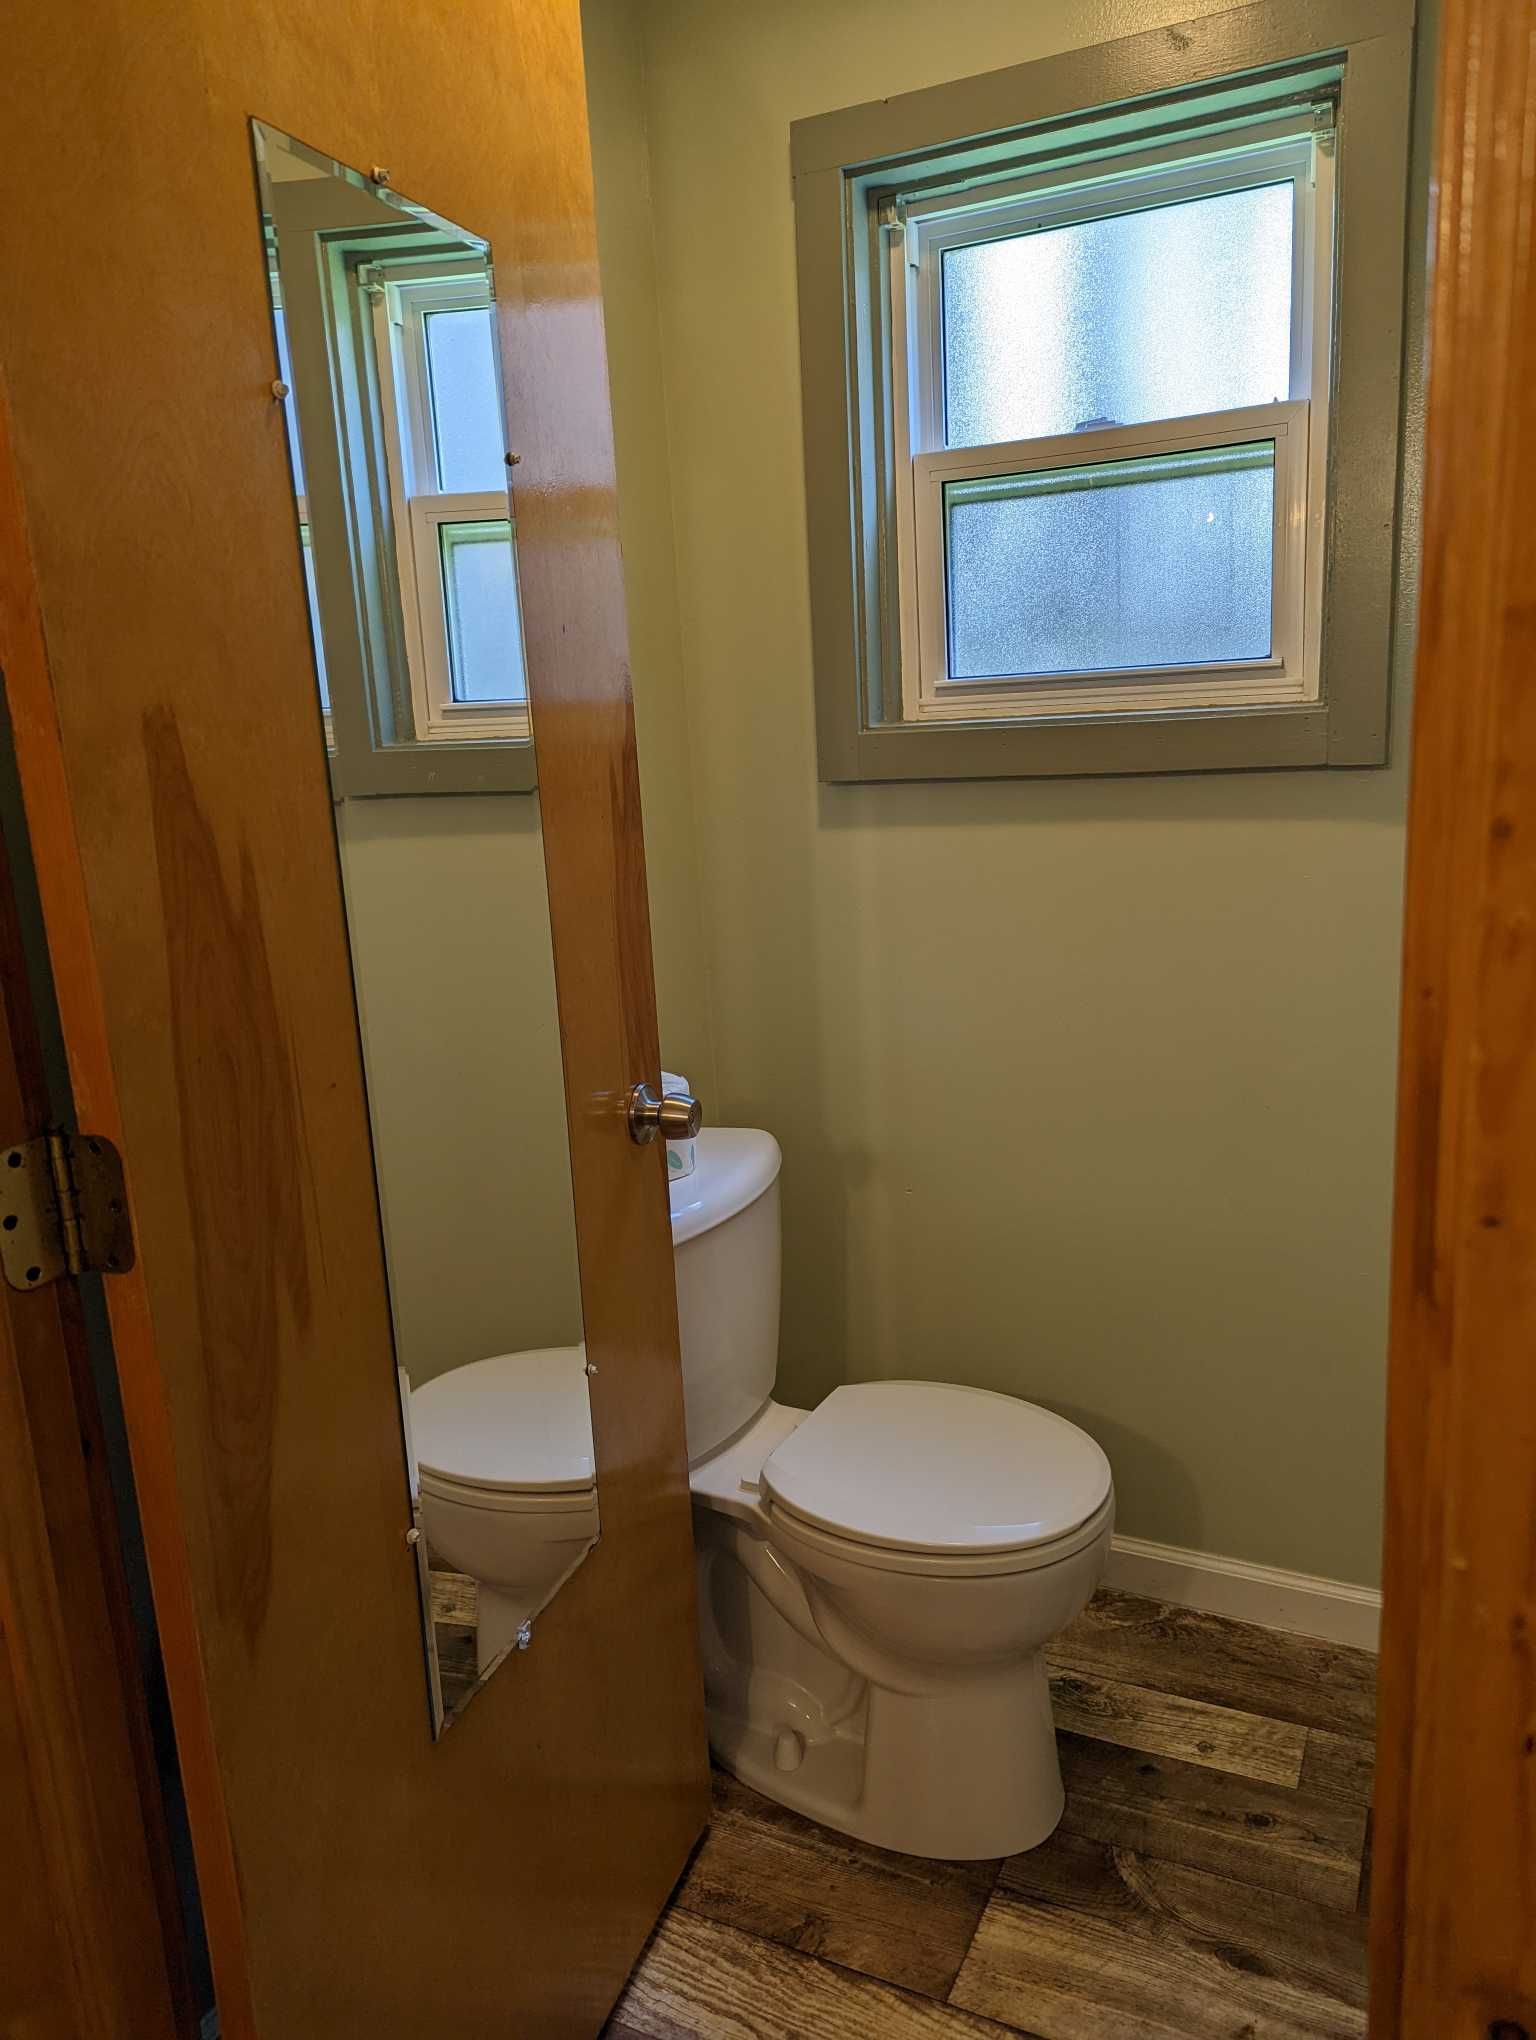 a bathroom with a window and a mirror